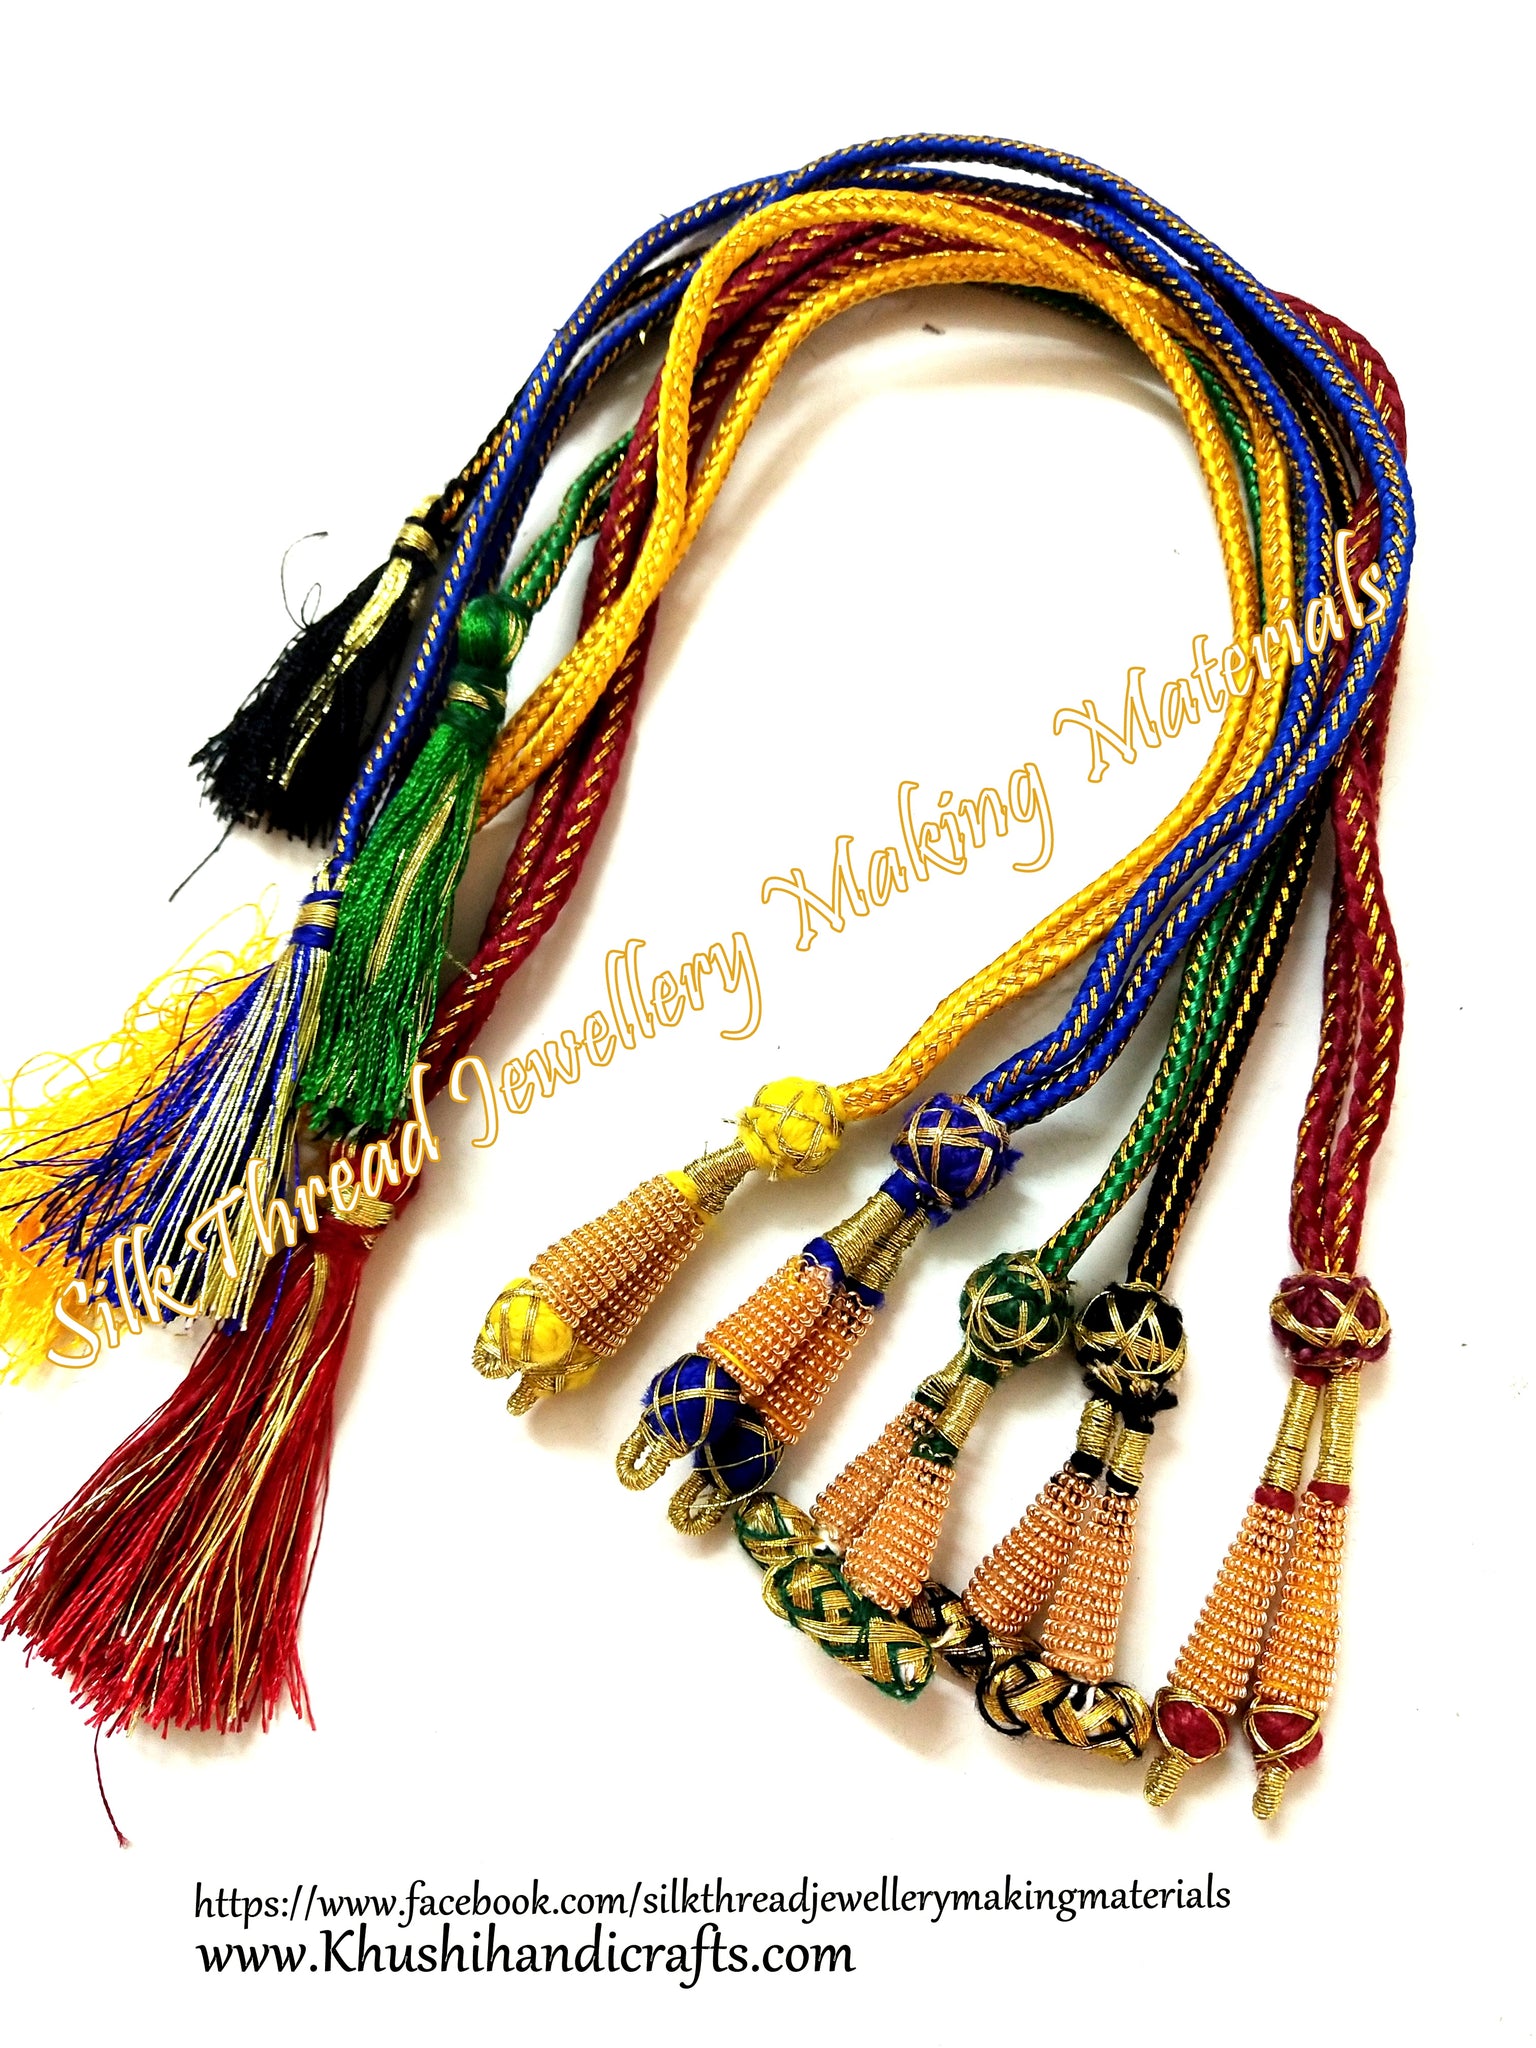 NEcklace cords